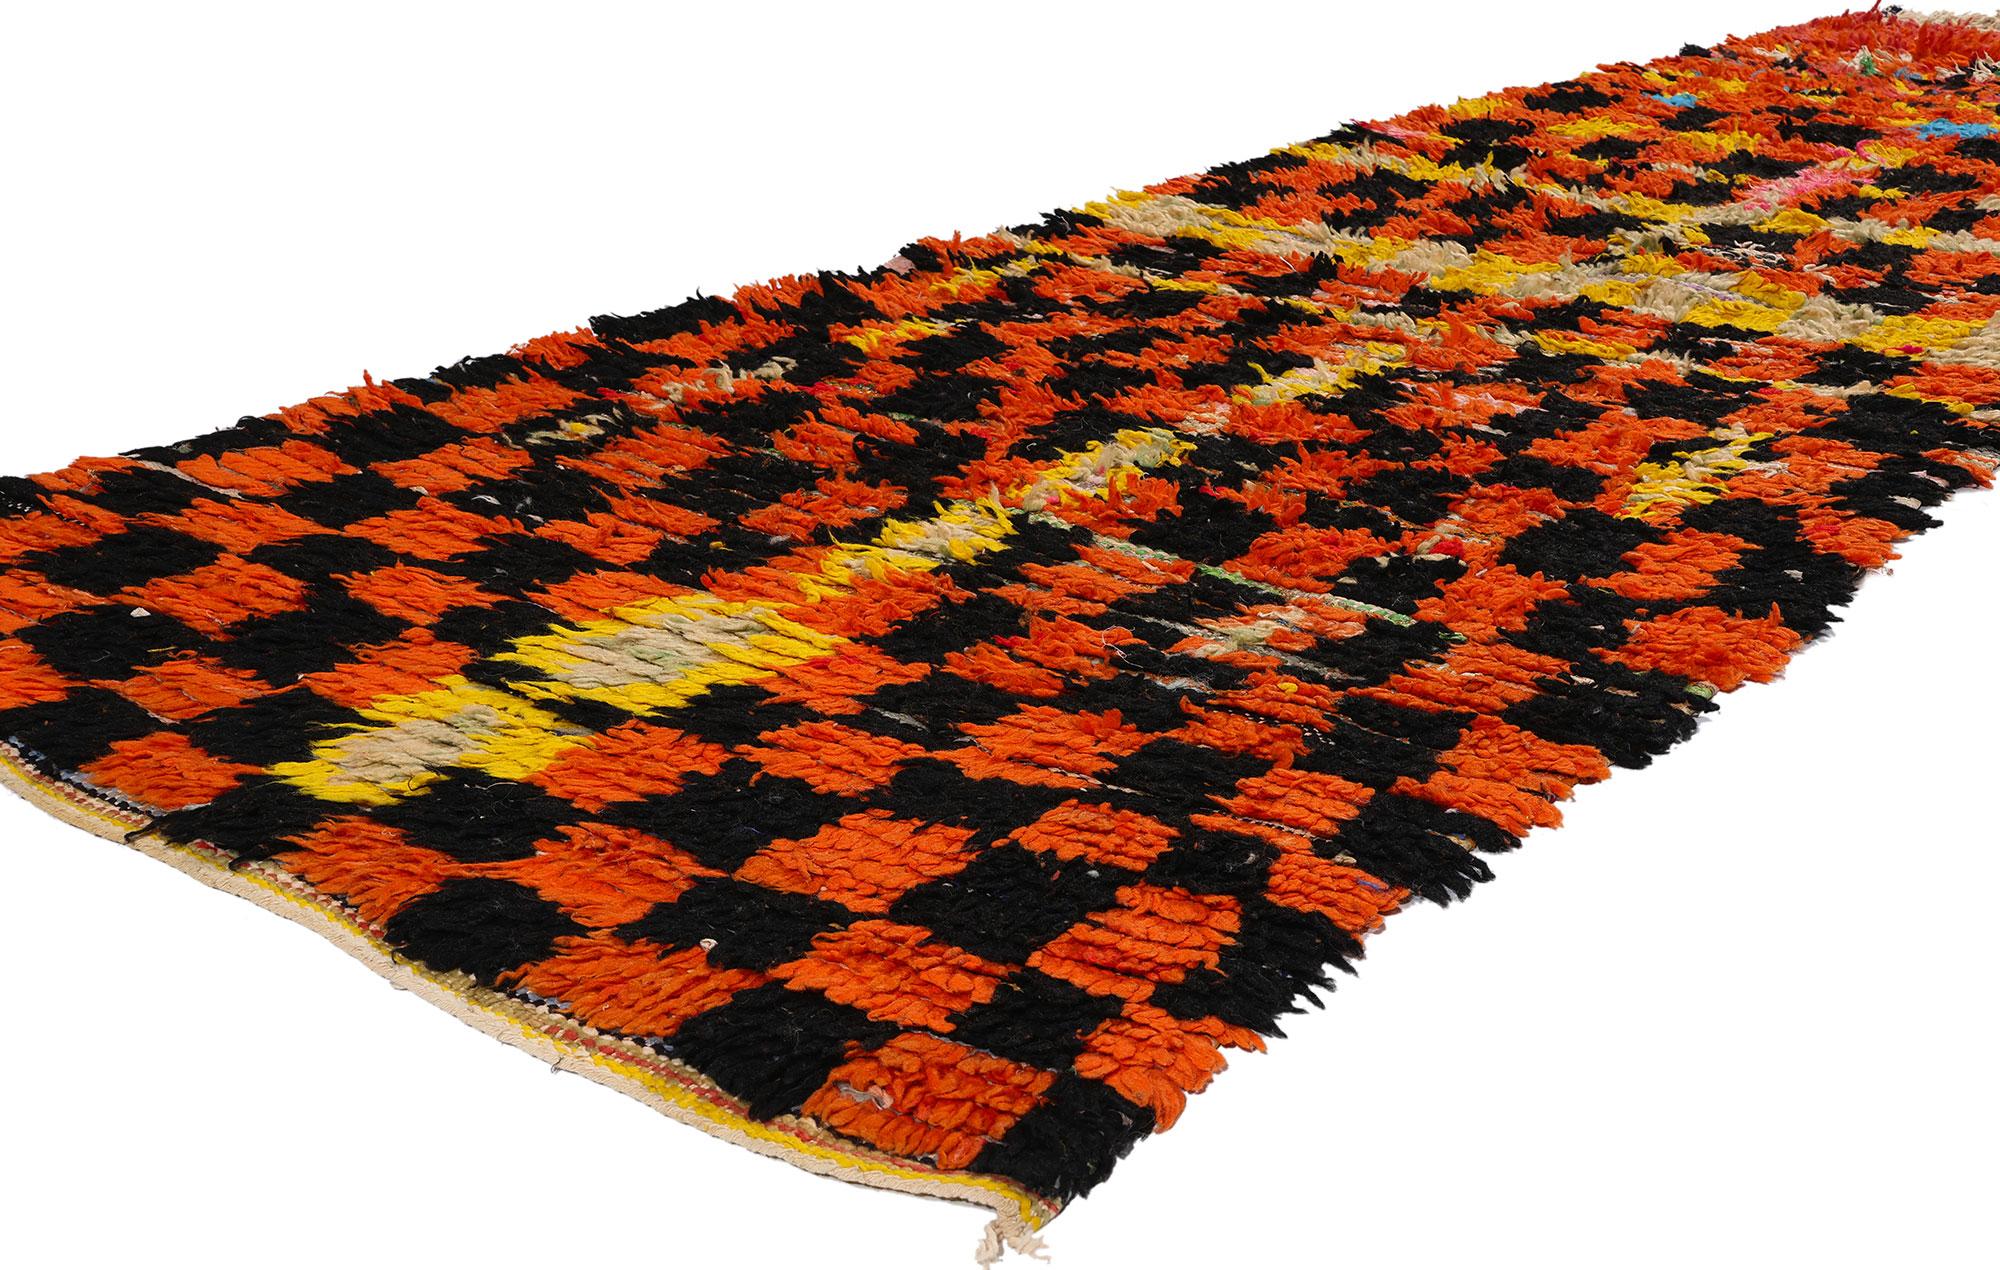 21760 Vintage Boucherouite Moroccan Azilal Rag Rug, 03'06 x 09'03. From the vibrant heart of central Morocco's provincial capital, cradled in the embrace of the High Atlas Mountains, unfolds the splendid legacy of Azila rugs – a distinctive